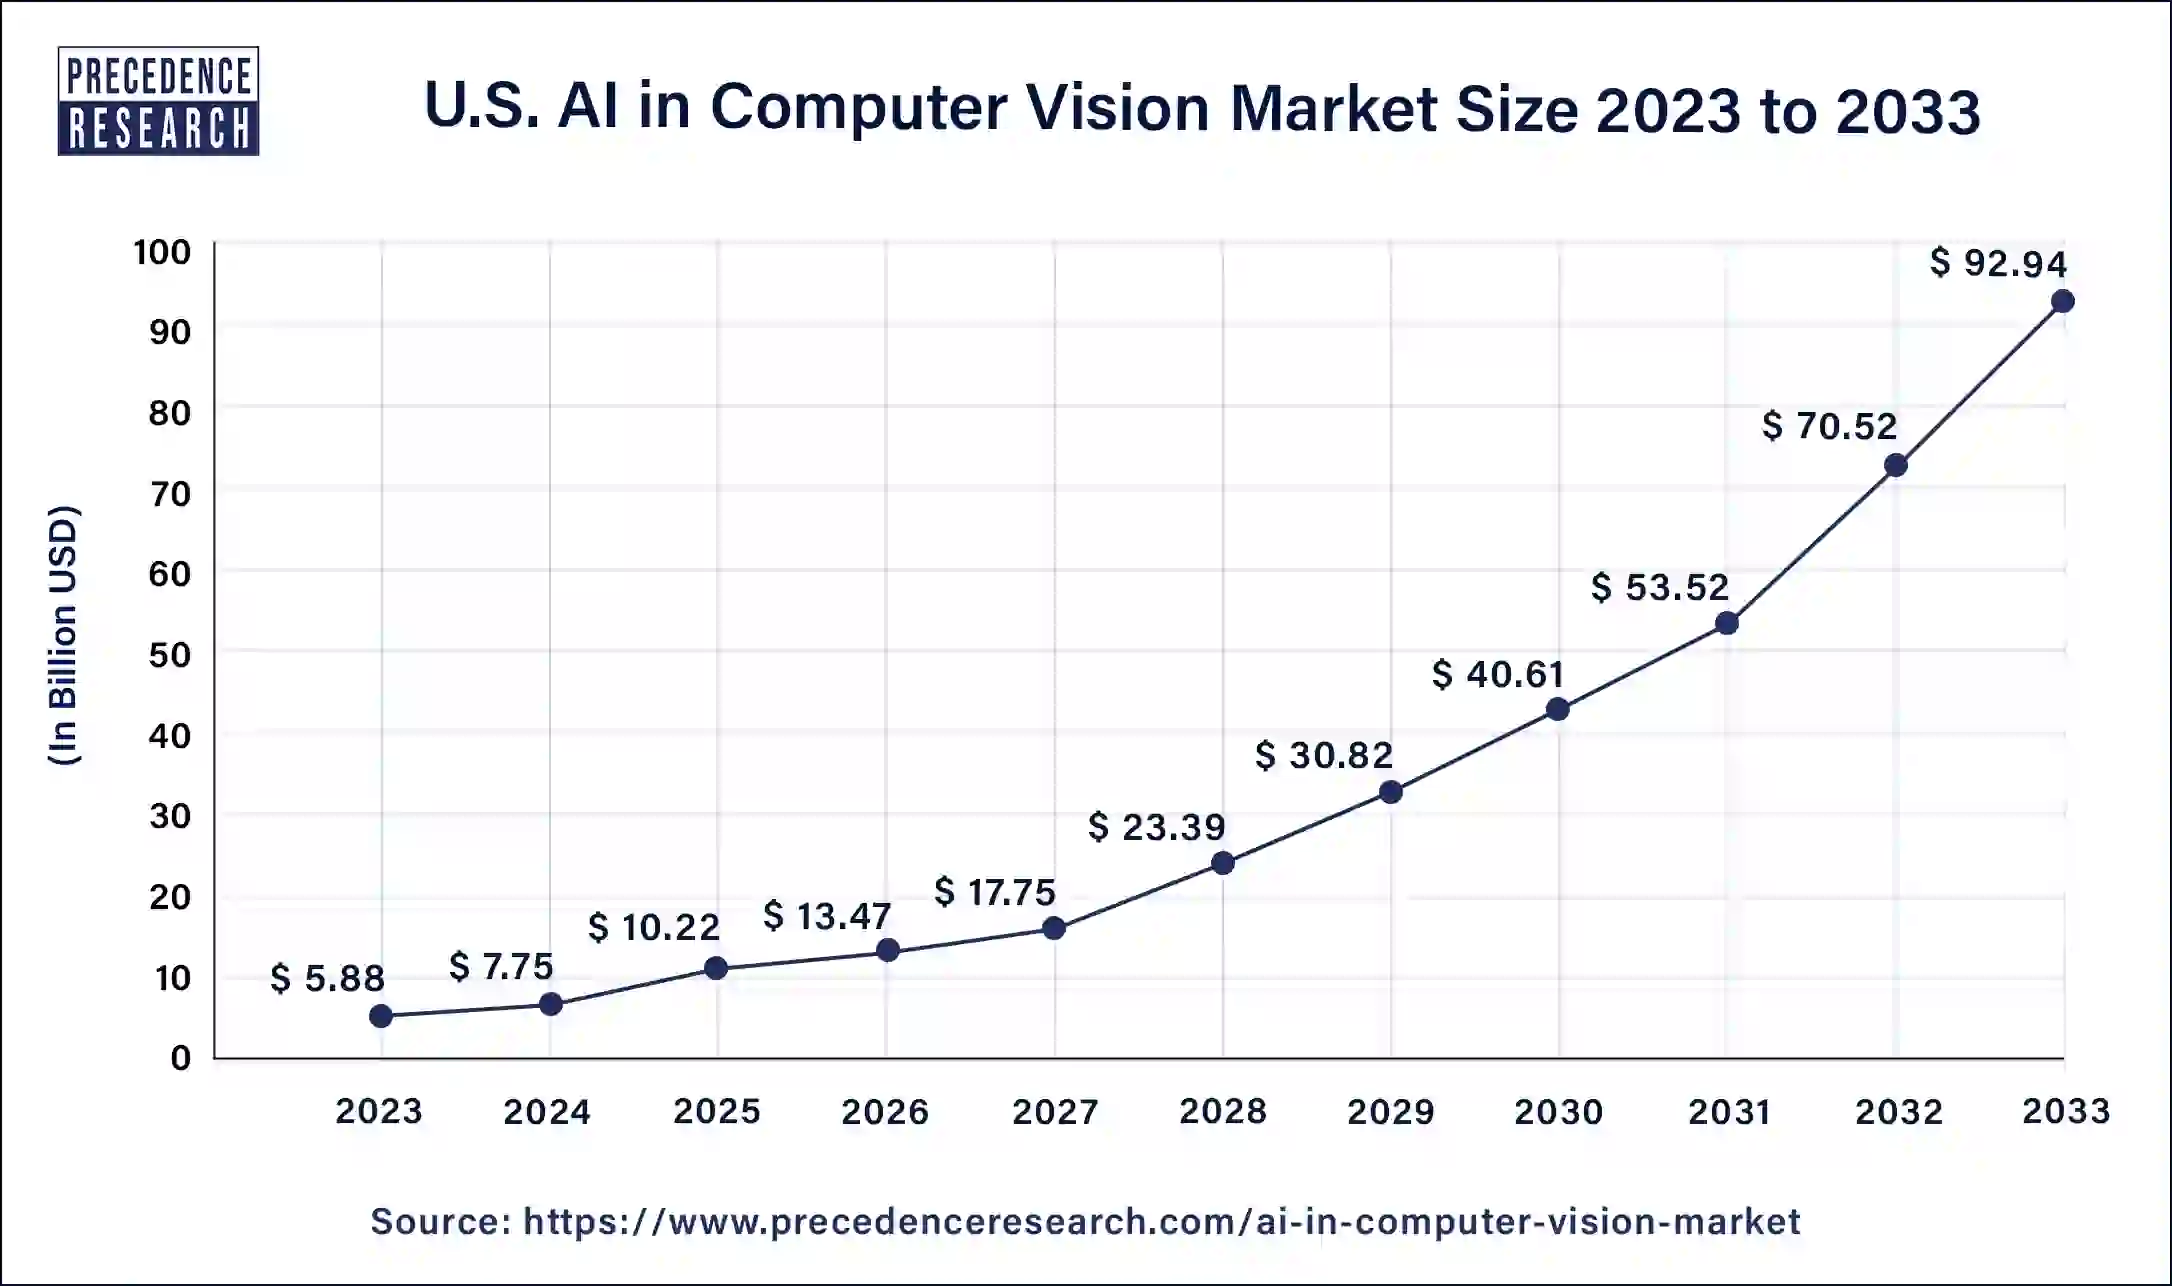 U.S. AI in Computer Vision Market Size 2024 to 2033